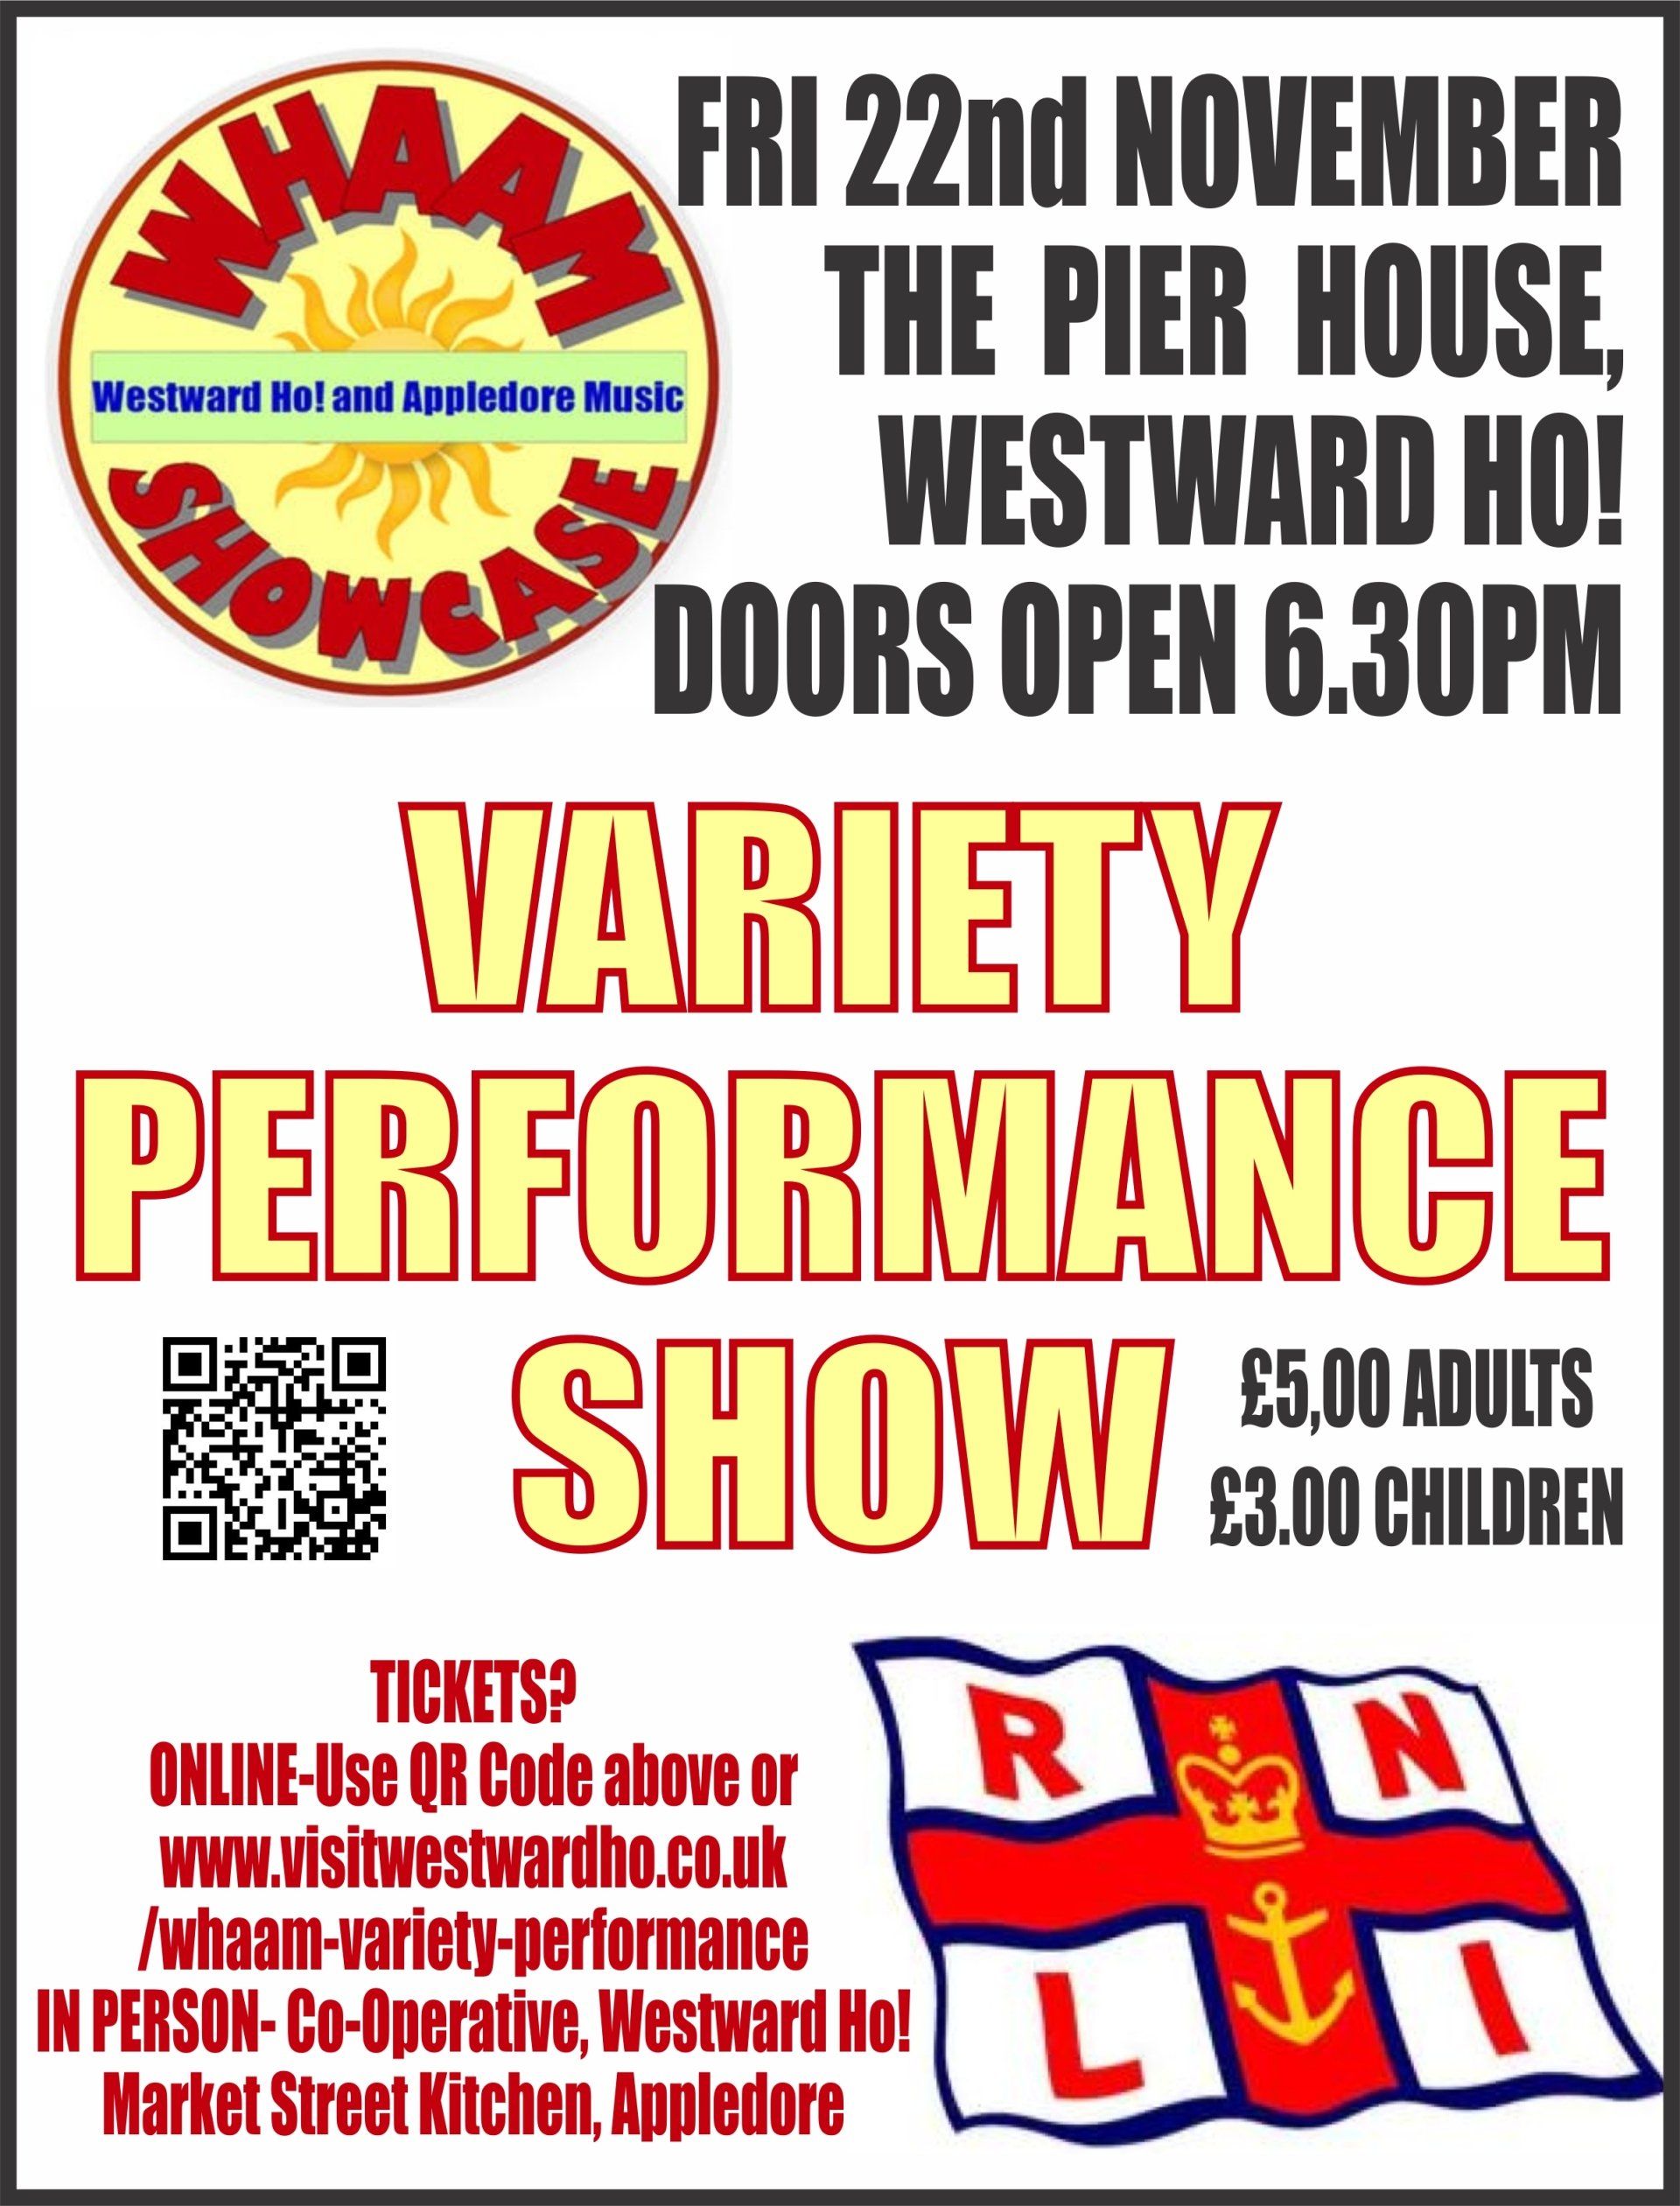 WHAAM Variety performance at The Pier House Westward Ho!